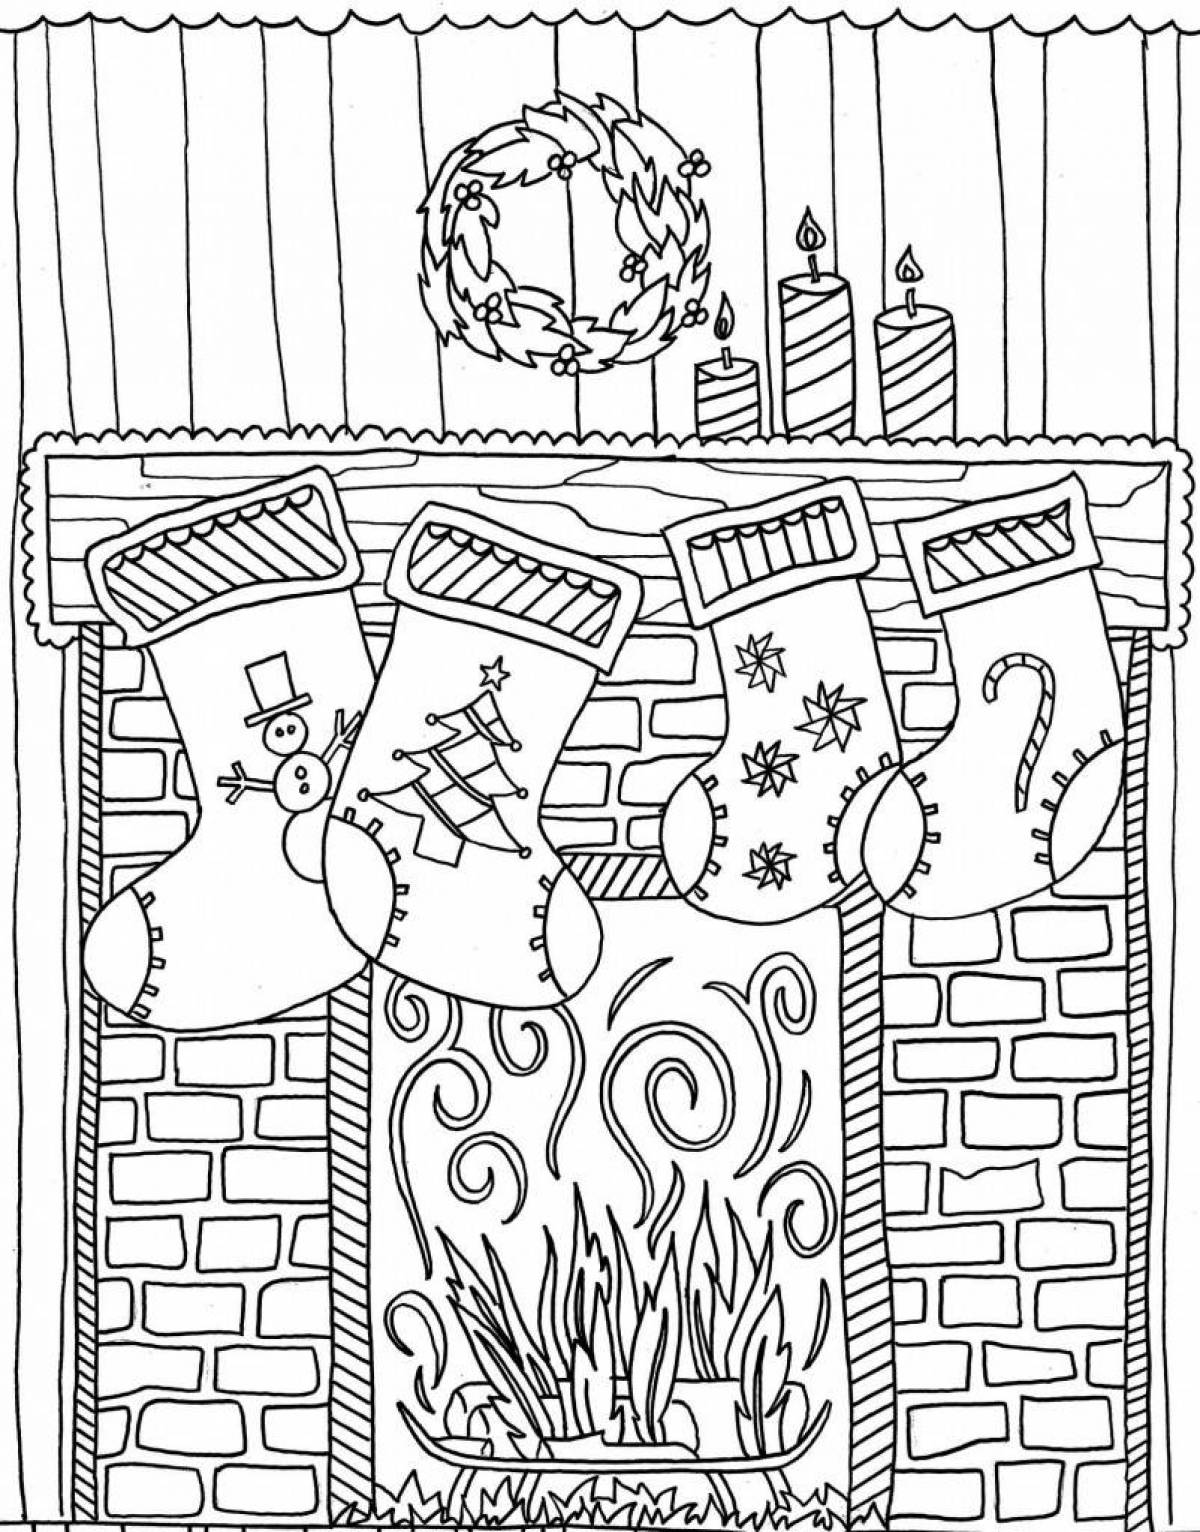 Coloring pageChristmas fireplace